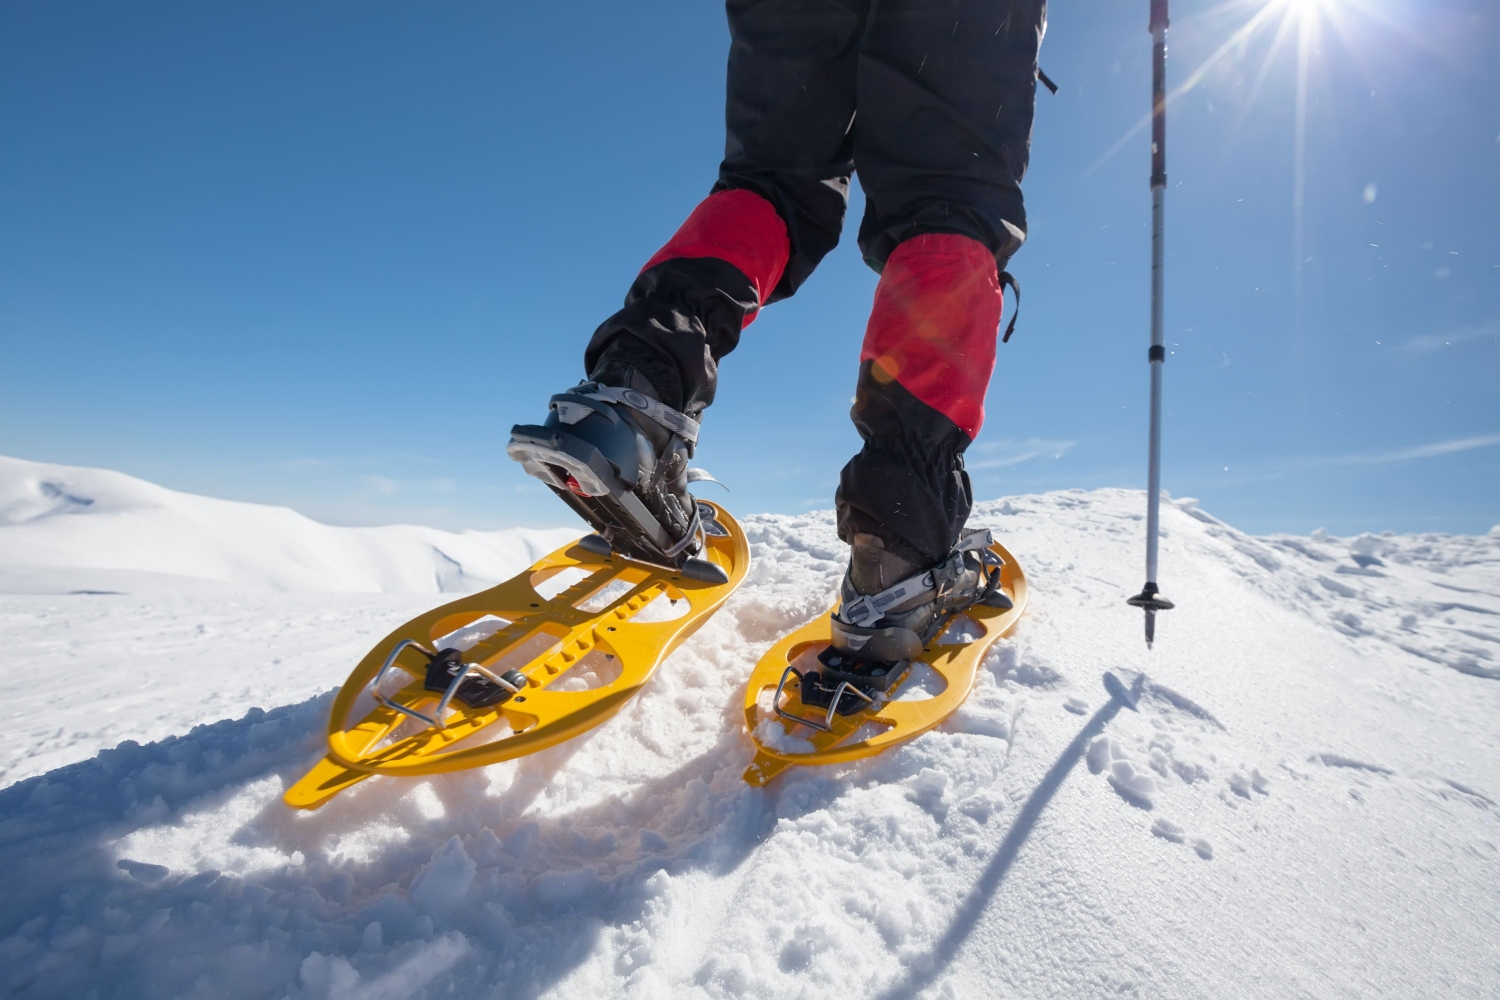 A persons feet with snowshoes on, sun in the background